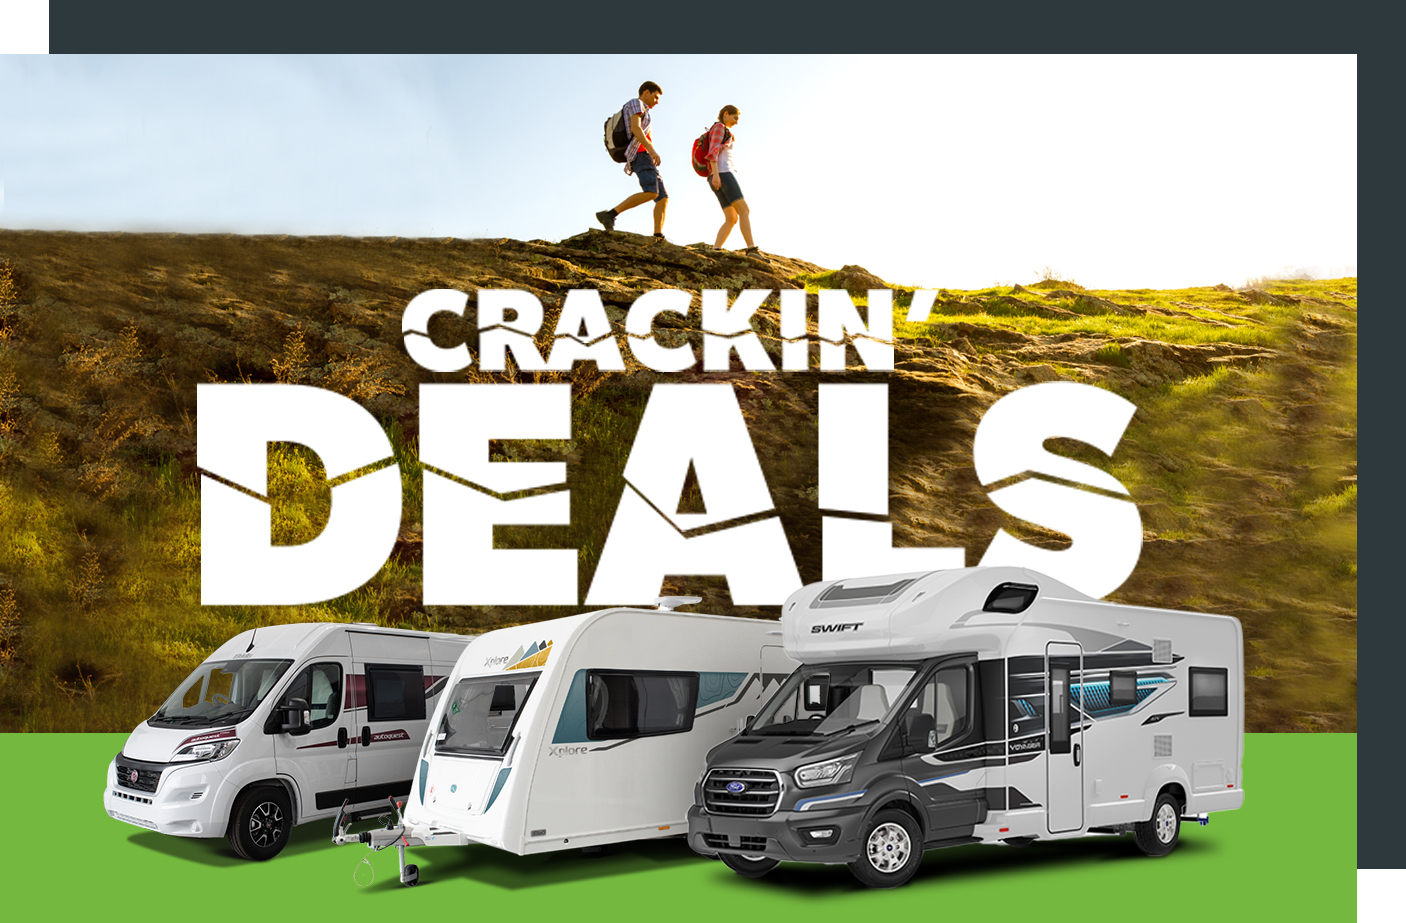 Leisure World Celebrates 40 Years with Crackin’ Deals on Caravans and Motorhomes